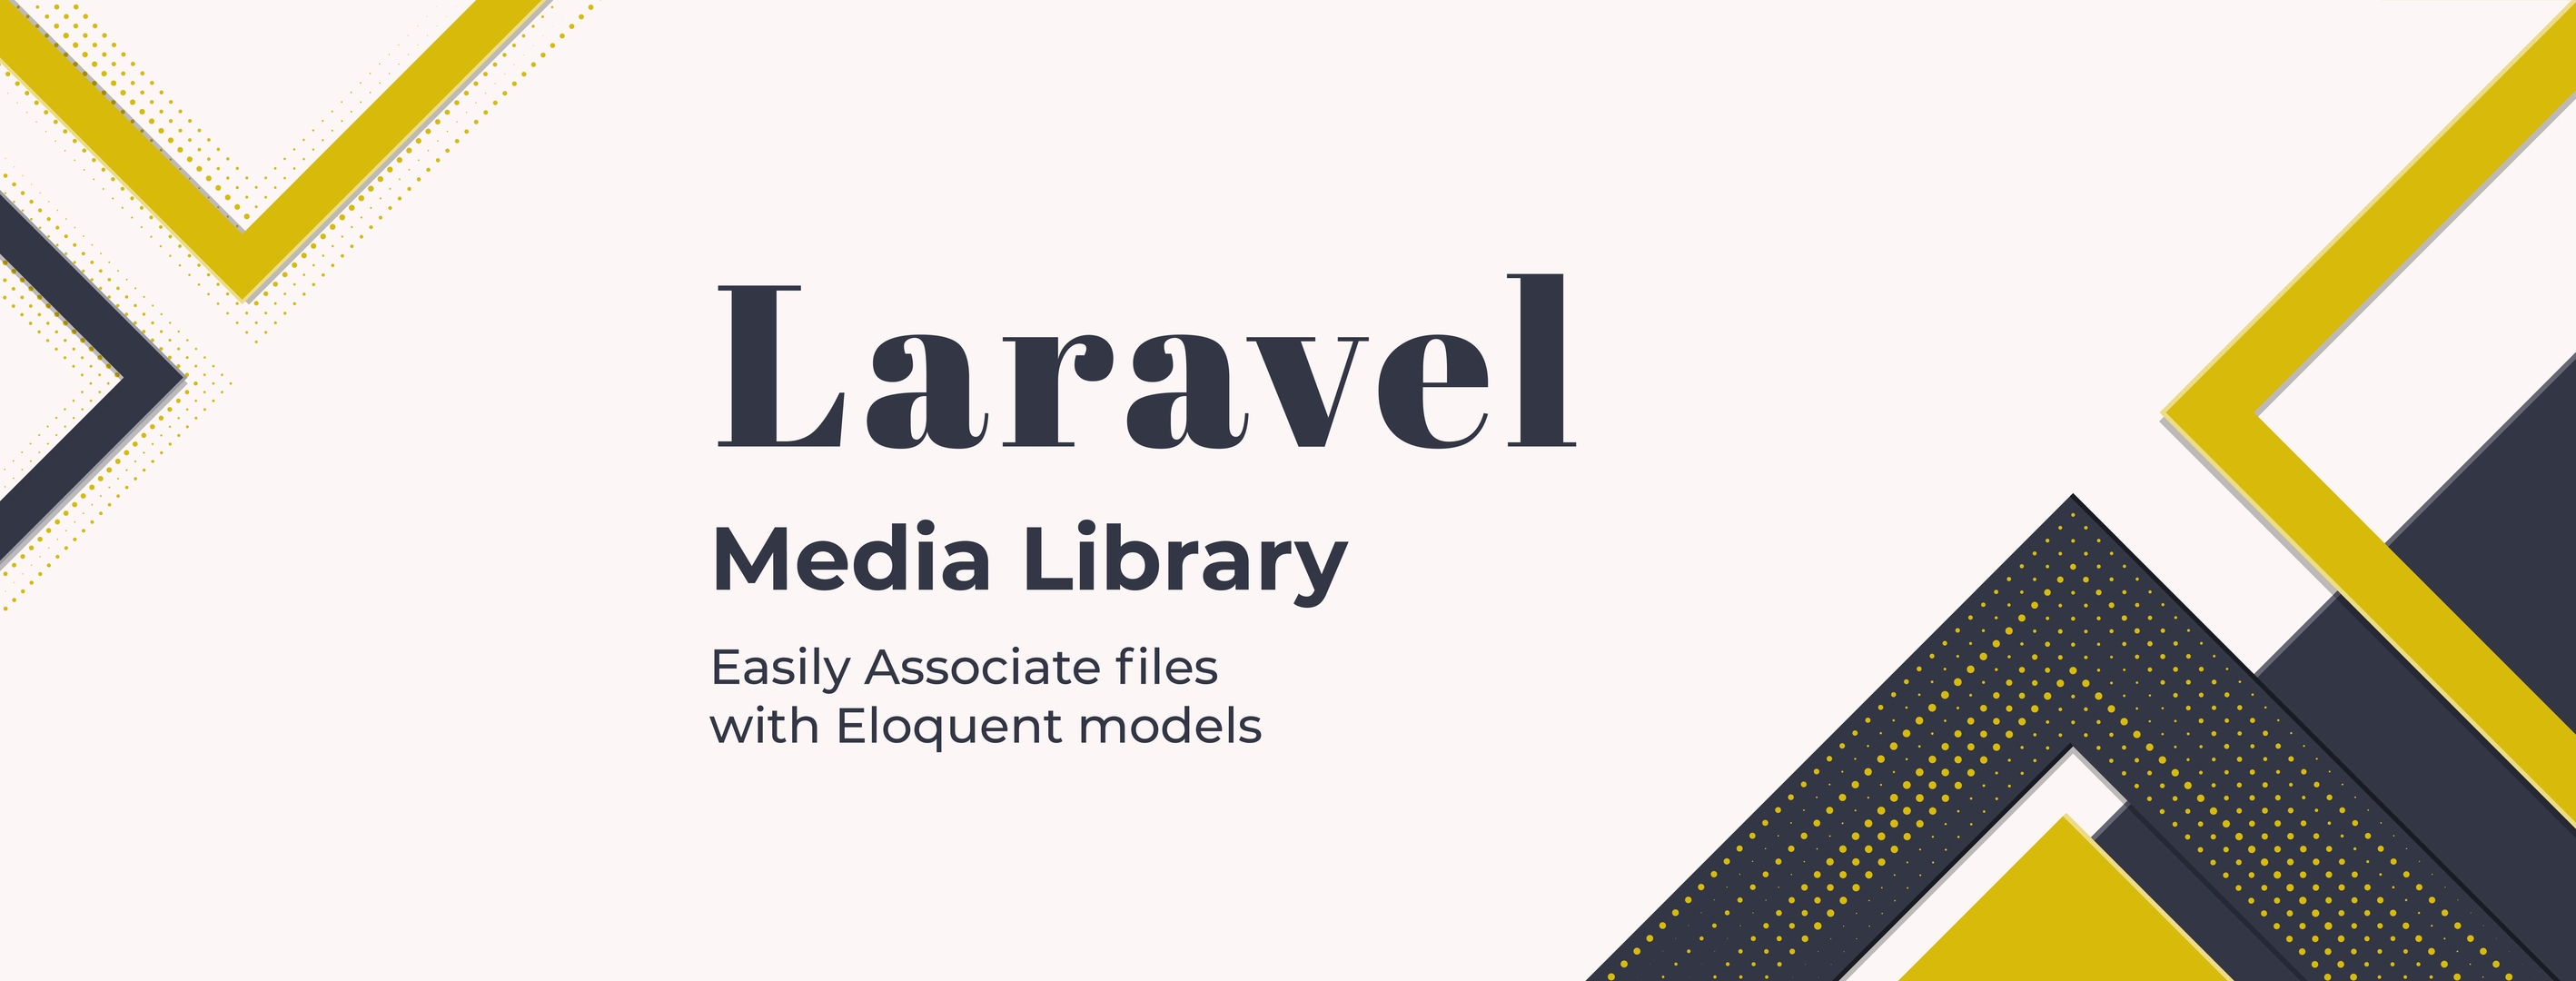 Laravel-Medialibrary - Associate files with Eloquent models